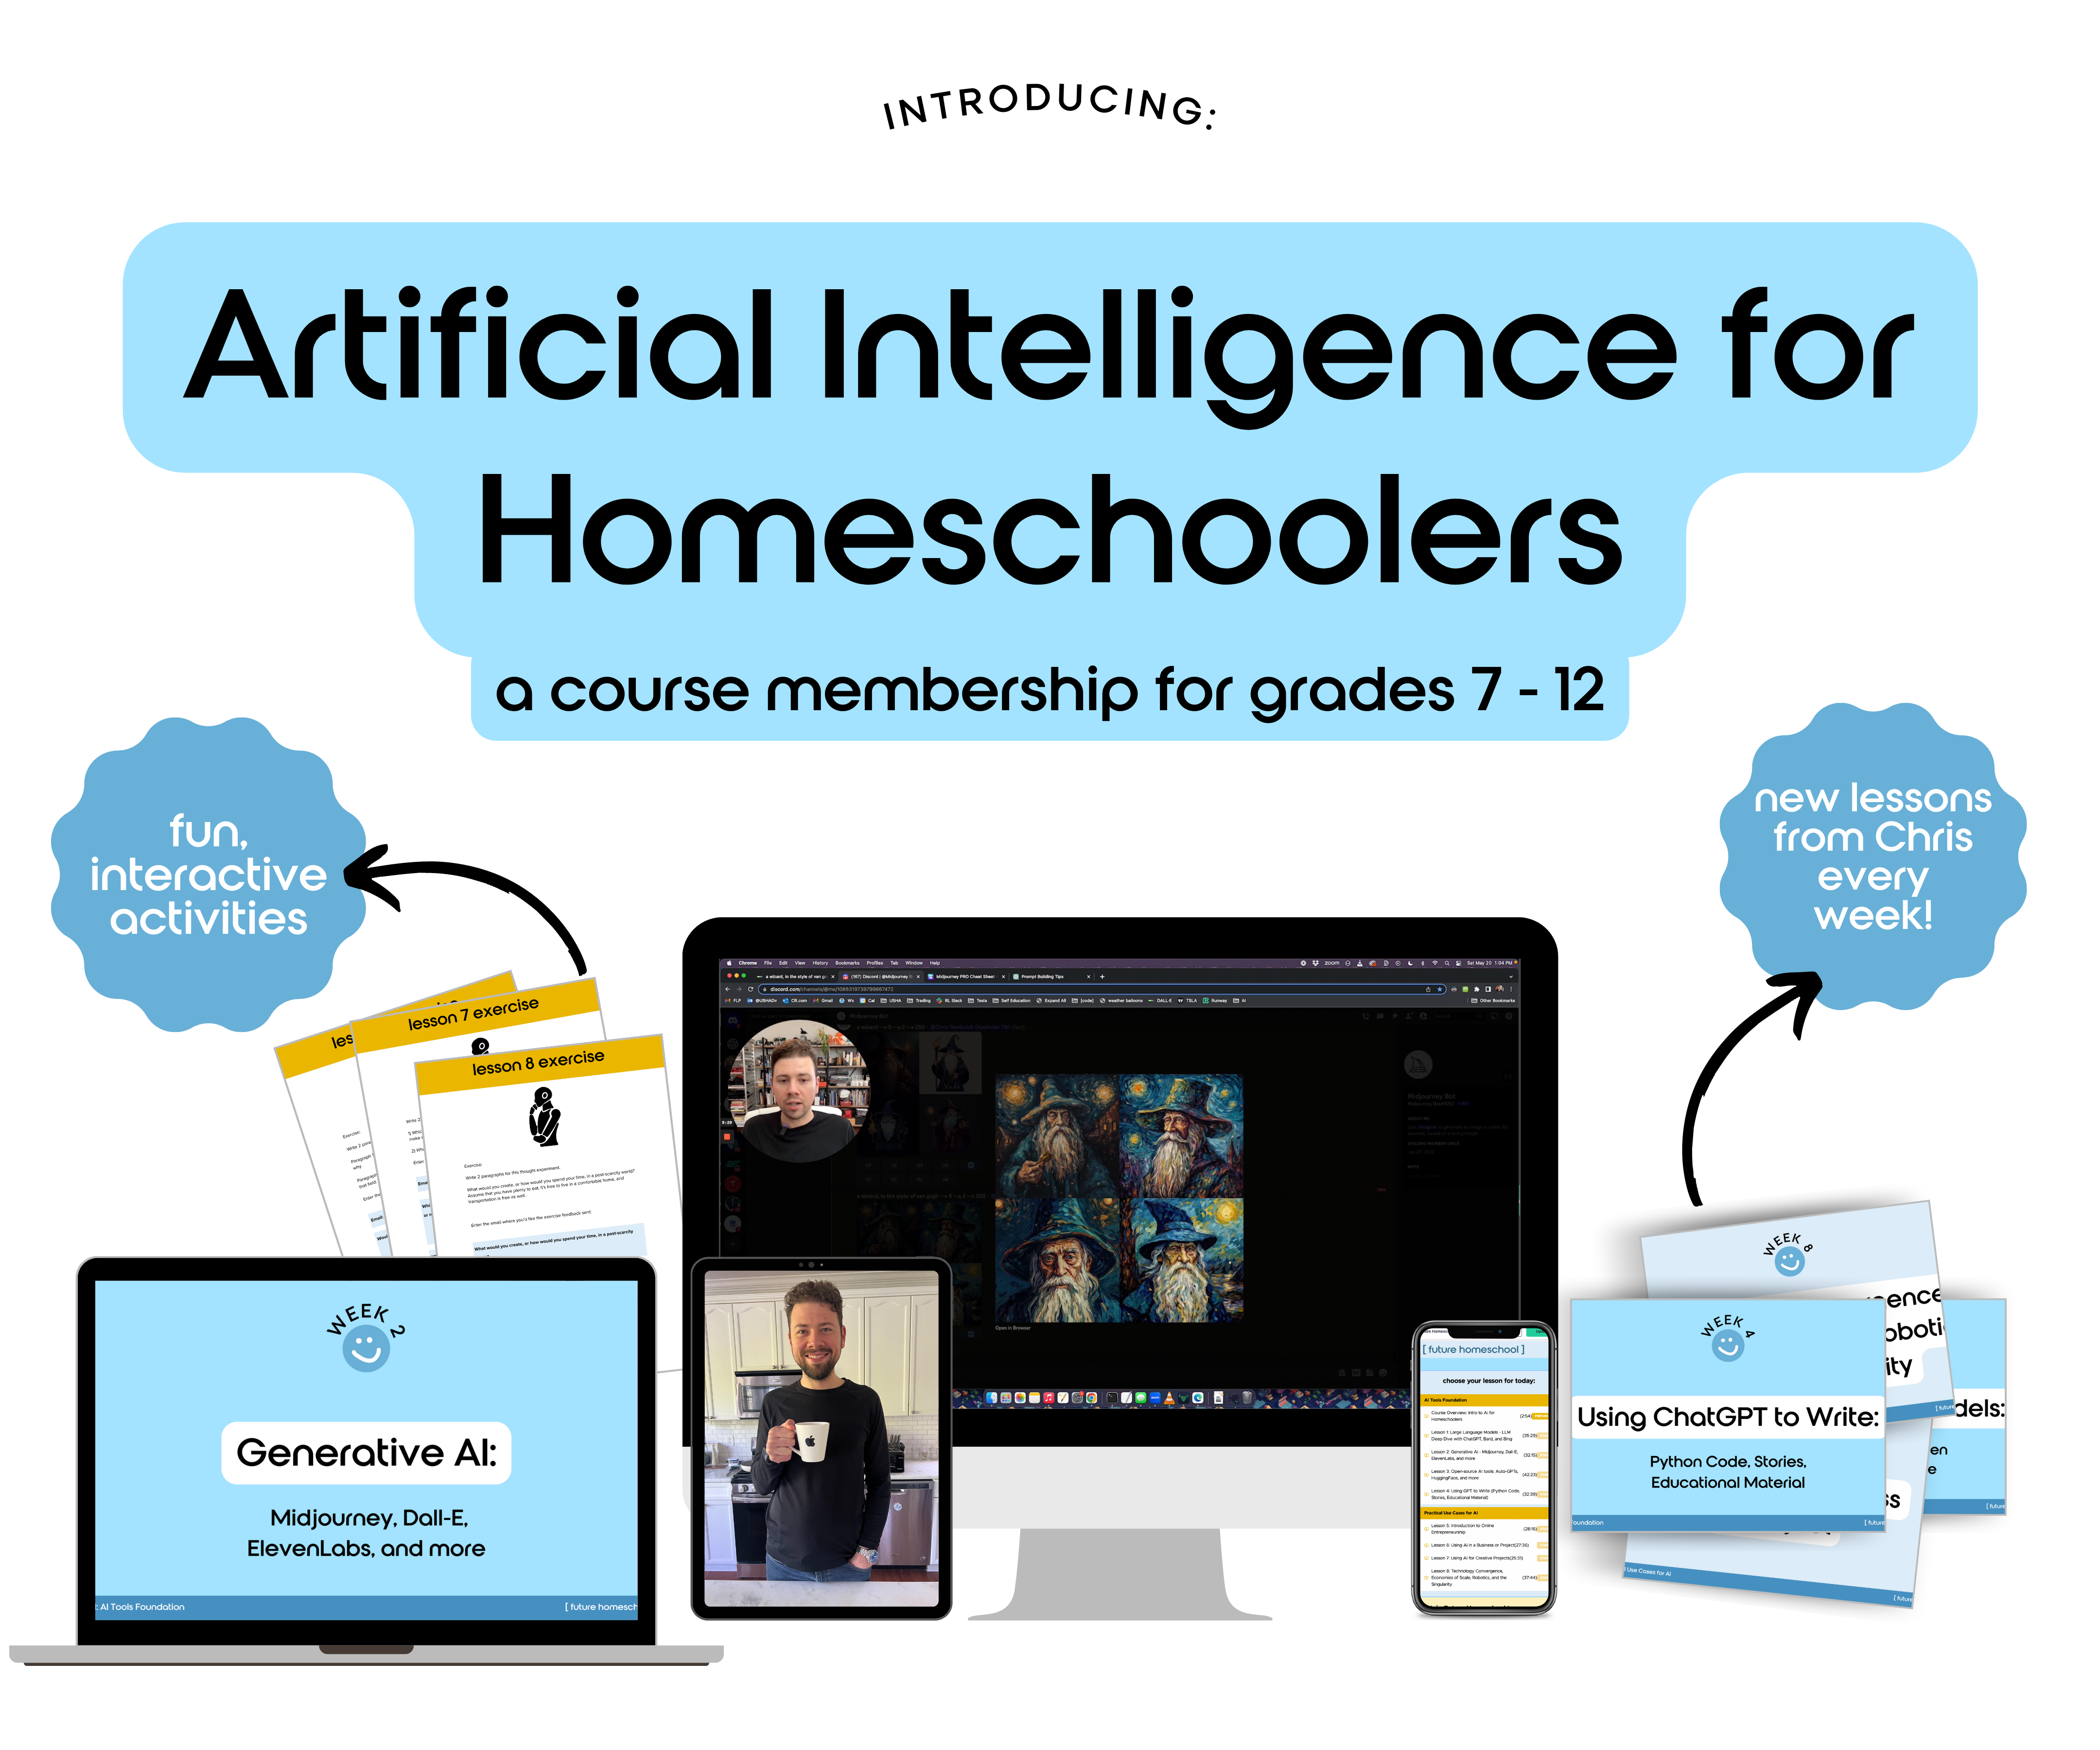 a mockup of the course: intro to artificial intelligence, an online course for homeschoolers. a computer, laptop, and mobile preview of the course